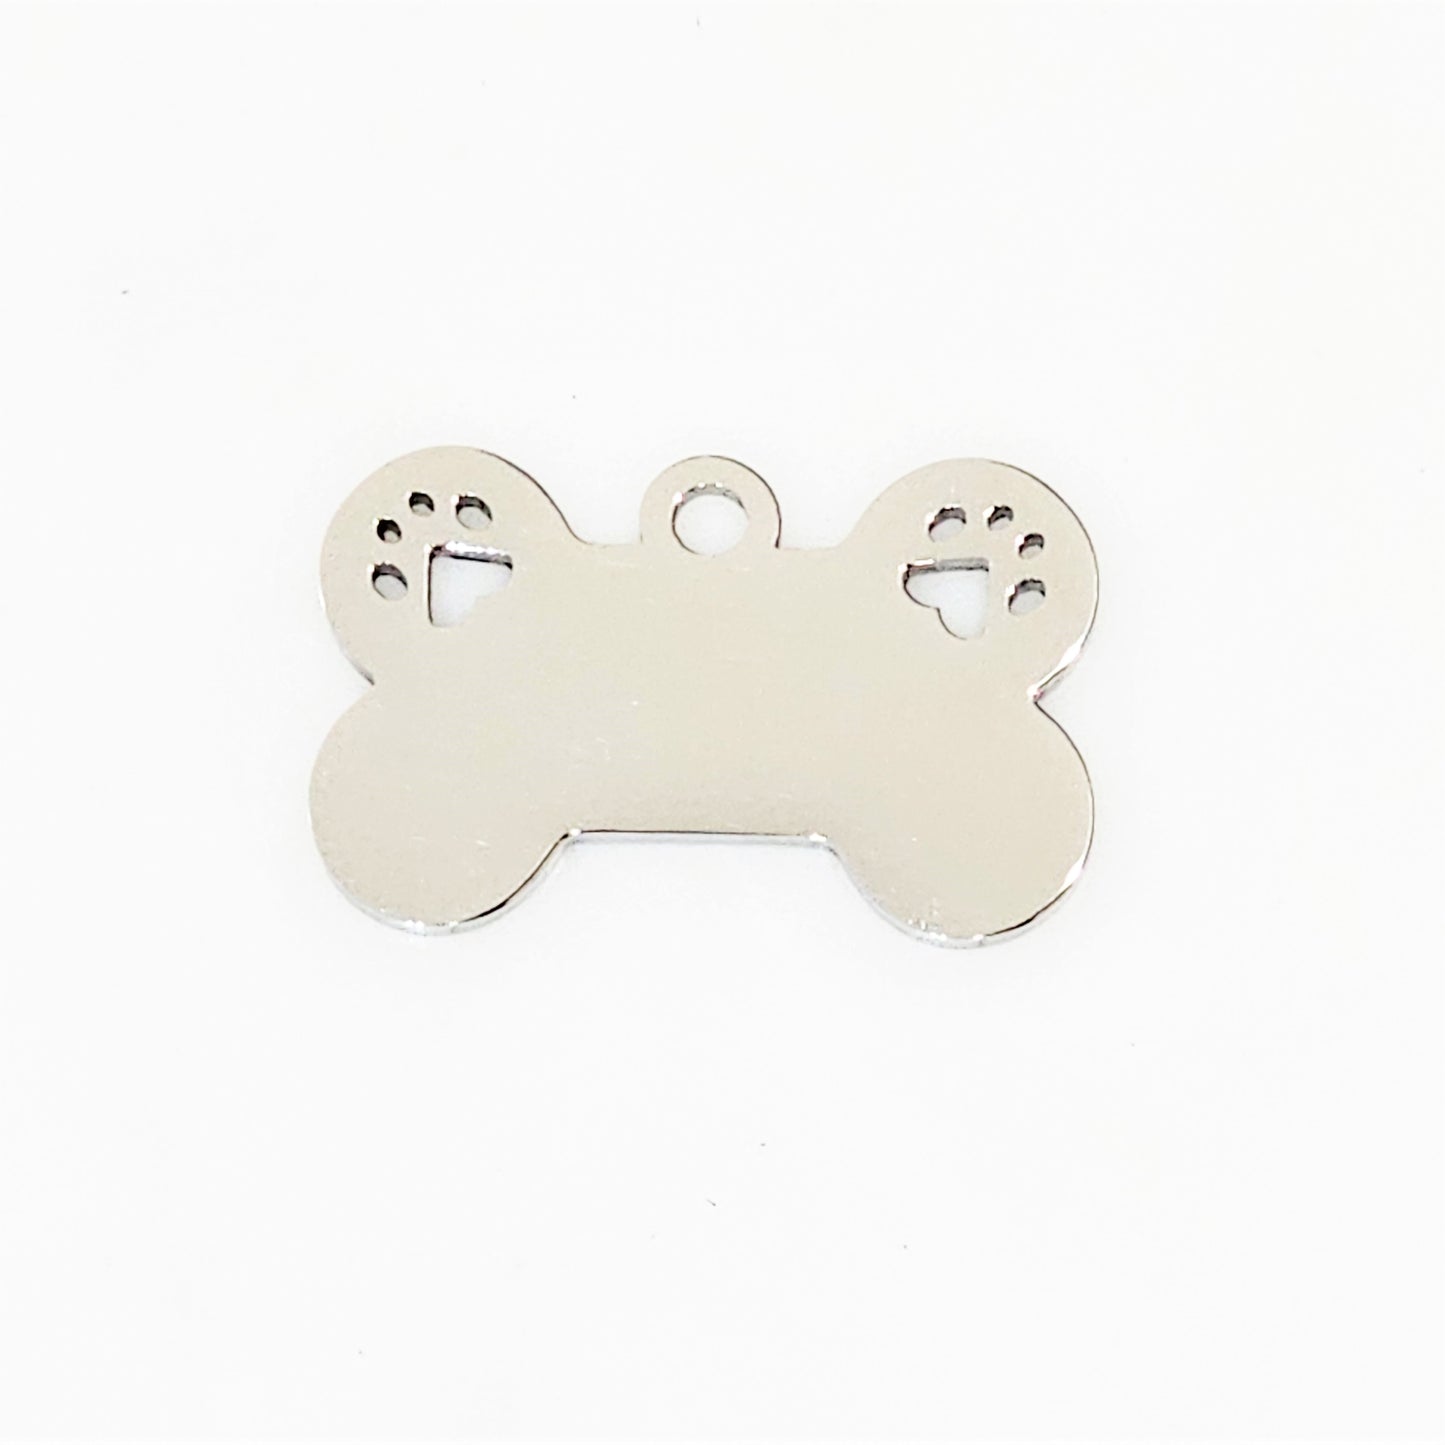 Stainless Steel Dog Bone with Two Paws - 16mm x 25mm